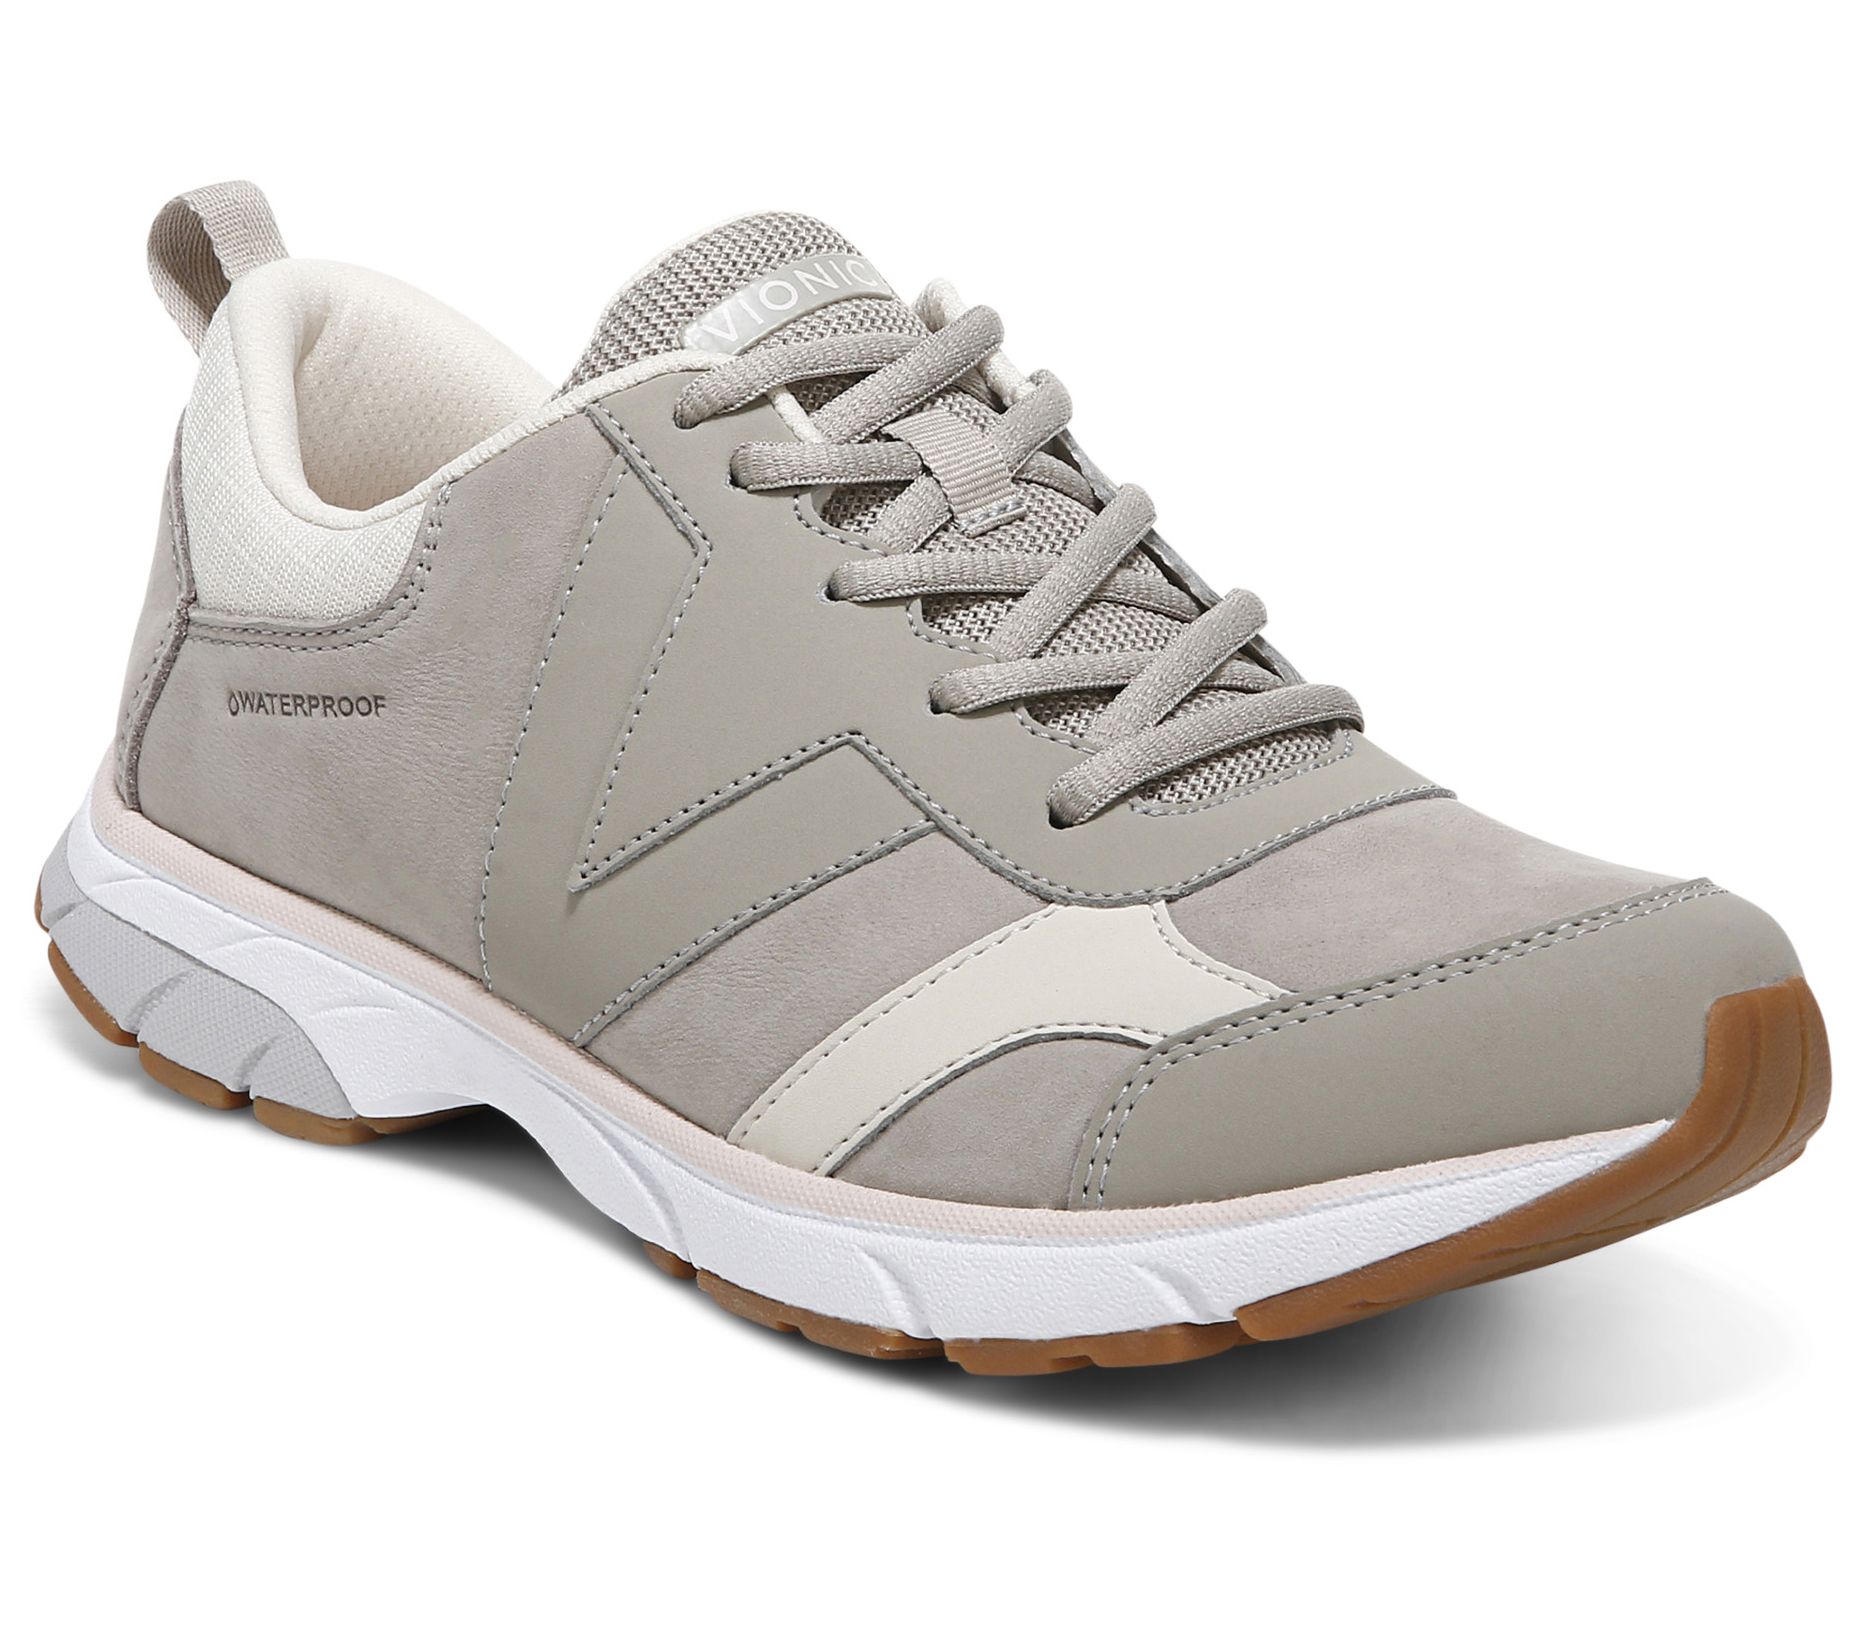 Vionic Lace-Up Athletic Sneakers - Zanny - QVC.com